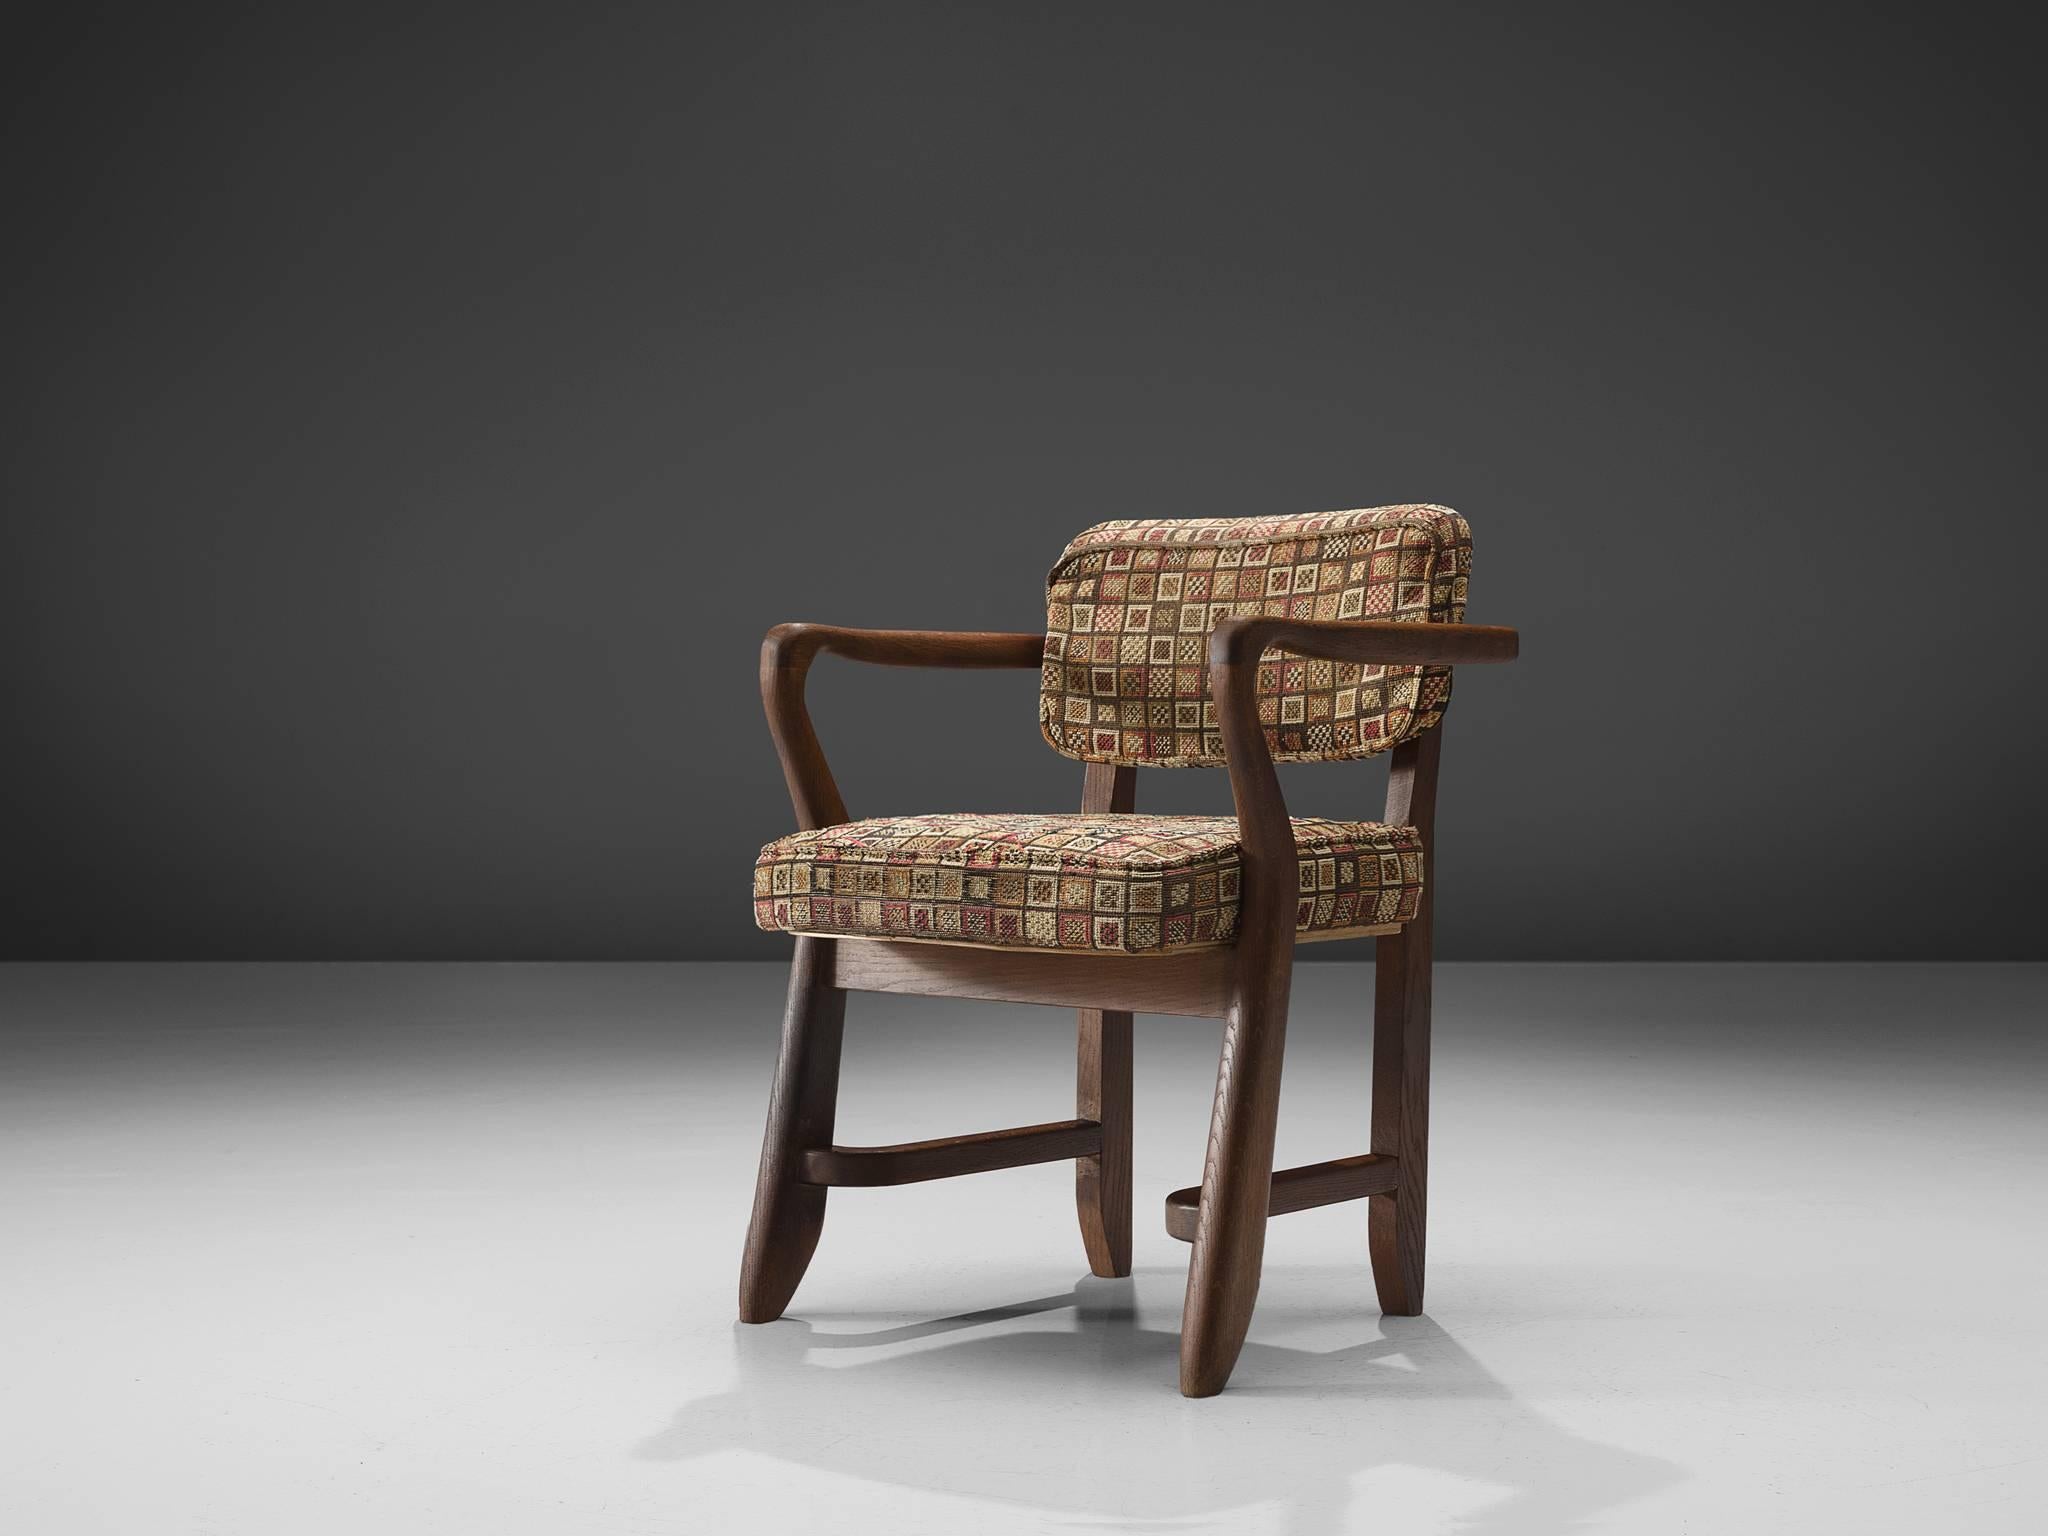 Guillerme & Chambron, 'Denis' armchairs, green fabric, oak, France, 1950s

This sculptural easy chair is designed by Guillerme & Chambron. The duo is known for their high quality solid oak furniture. The sculptural armchair has an interesting open